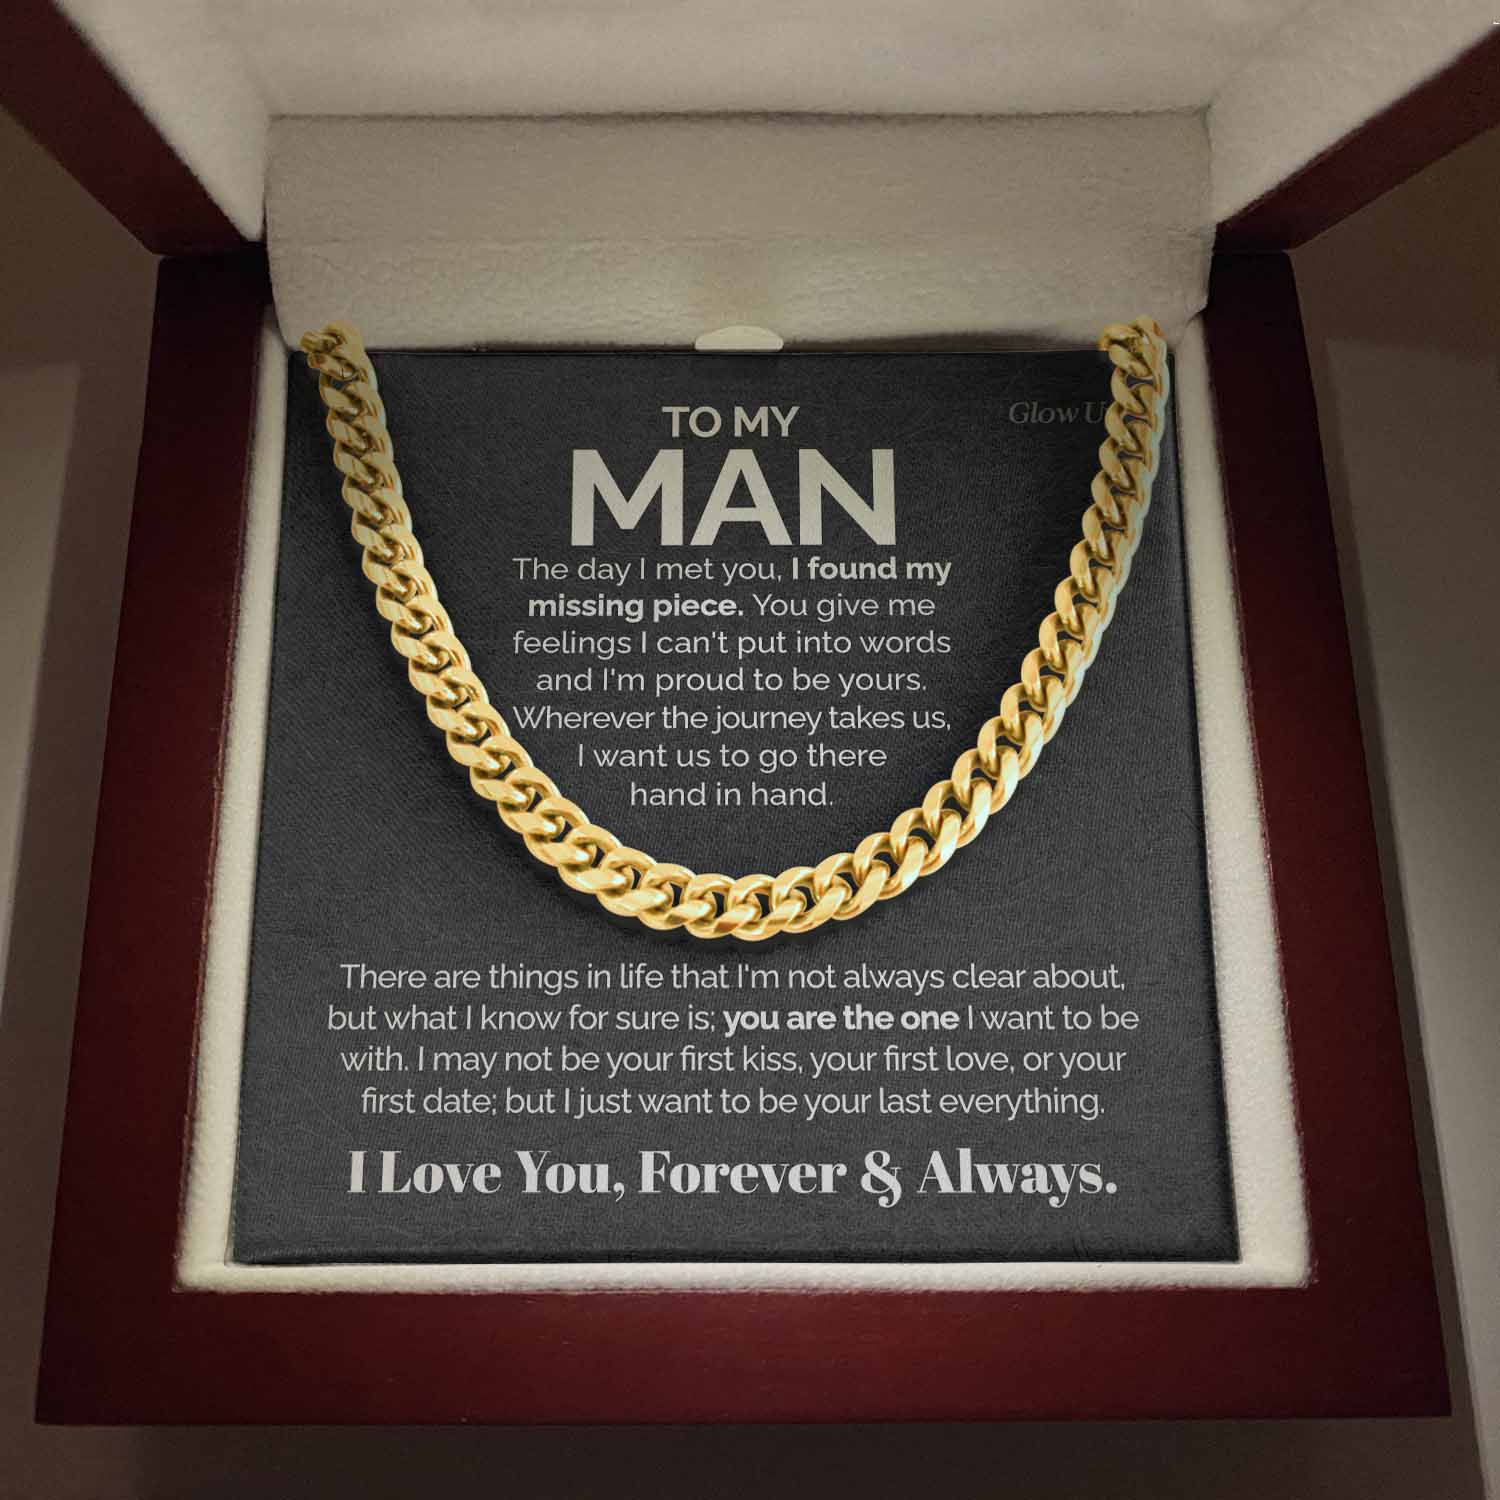 ShineOn Fulfillment Jewelry 14K Gold Over Stainless Steel / Luxury Box To my Man - I found my missing piece - Cuban Link Chain